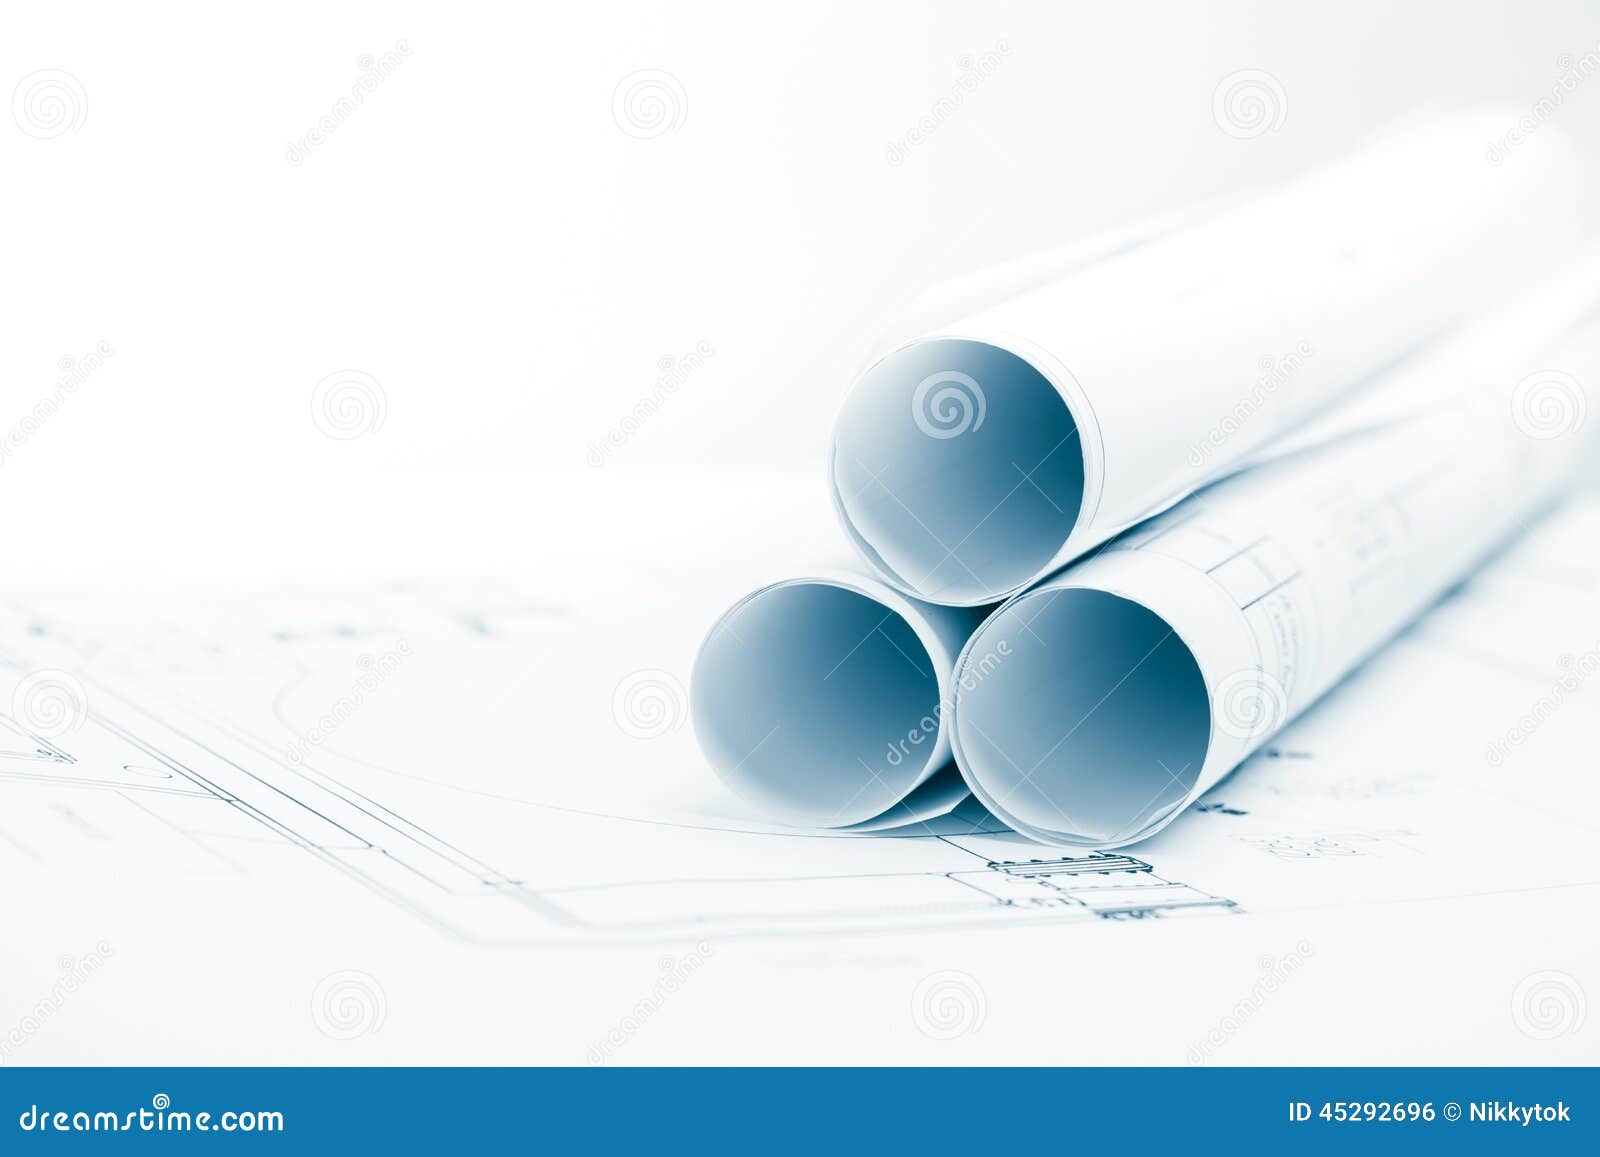 518,012 Plan Background Stock Photos - Free & Royalty-Free Stock Photos  from Dreamstime